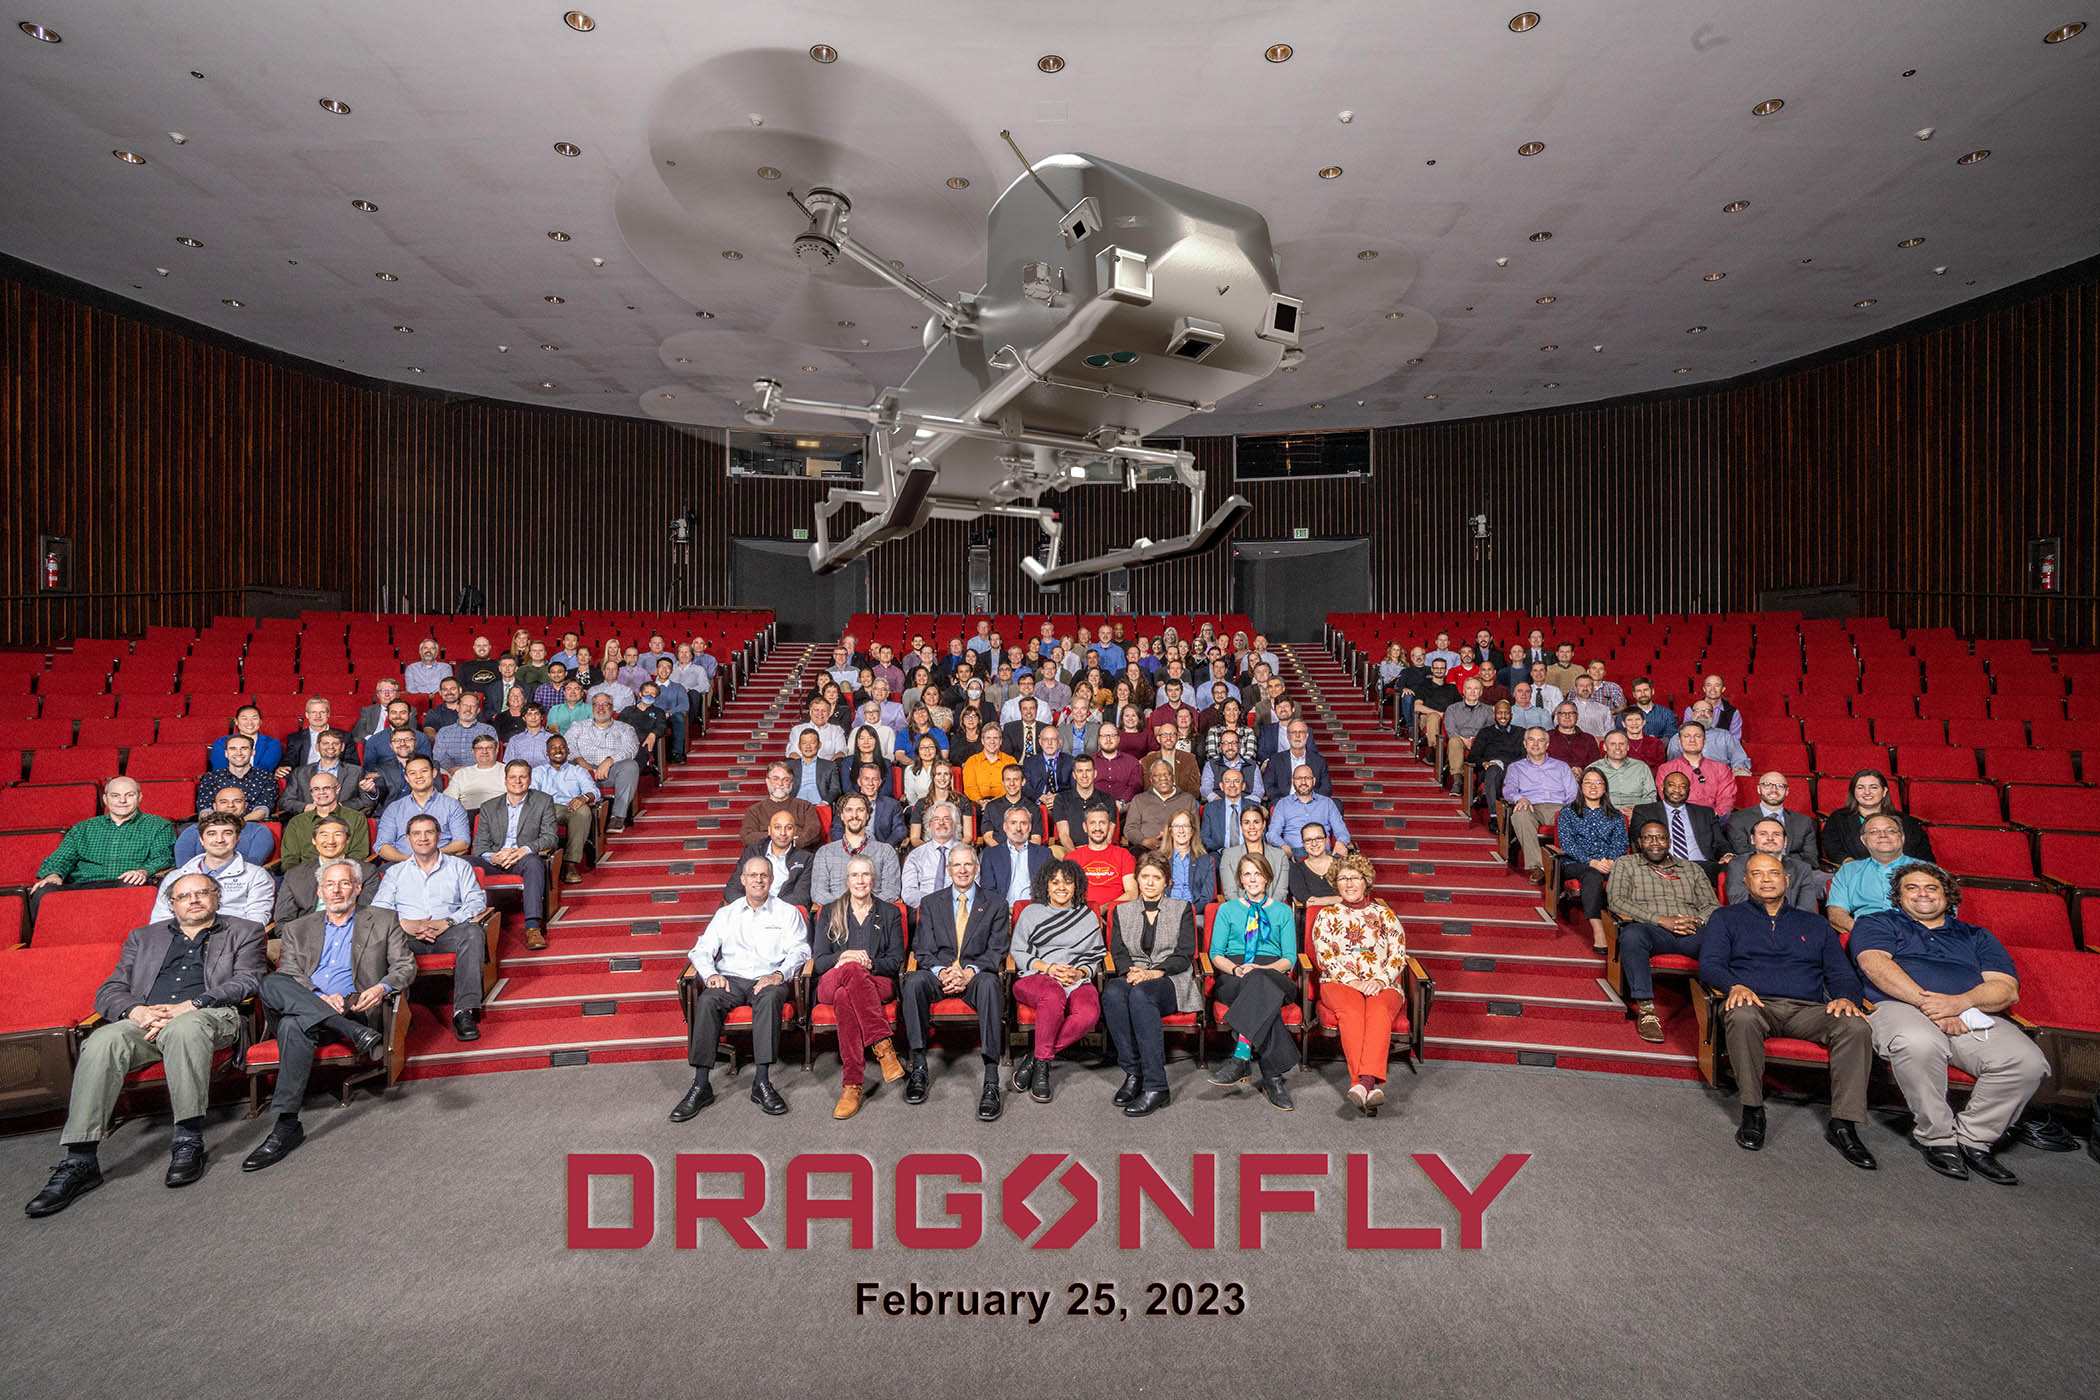 A group of people sit in an auditorium full of red chairs while an illustration of the Dragonfly rotorcraft flies above them